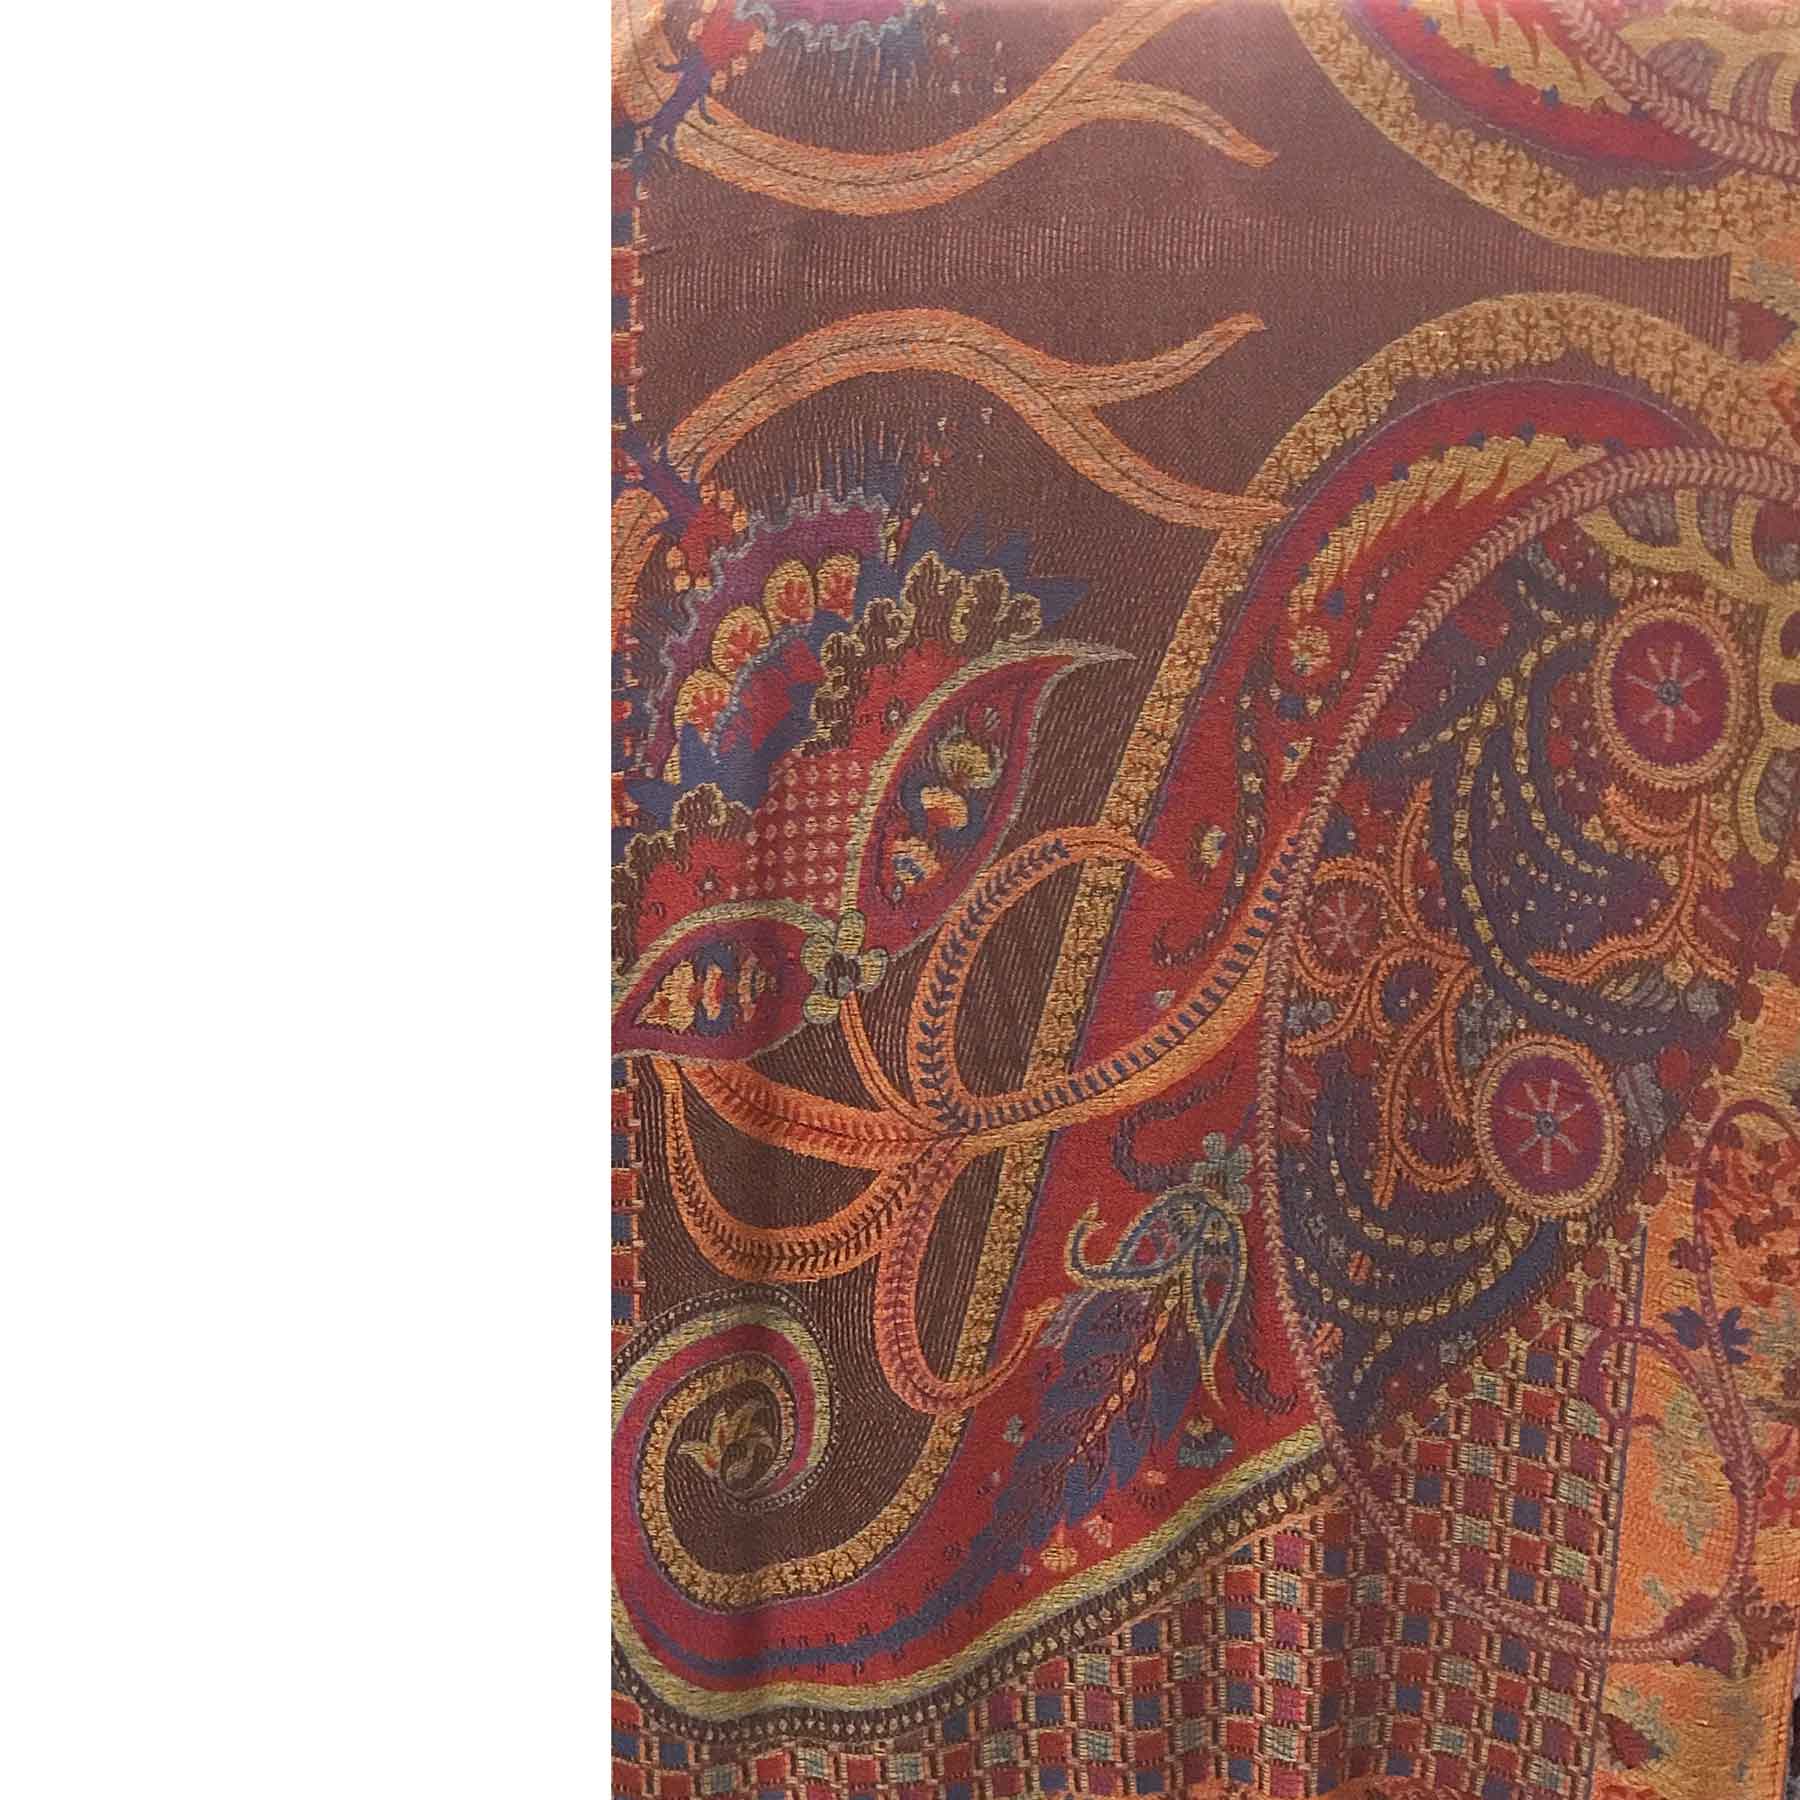 3109 - Pashmina Style Button Shawls 2021 - #13 Abstract Paisley<br>
Pashmina Style Button Shawl - 